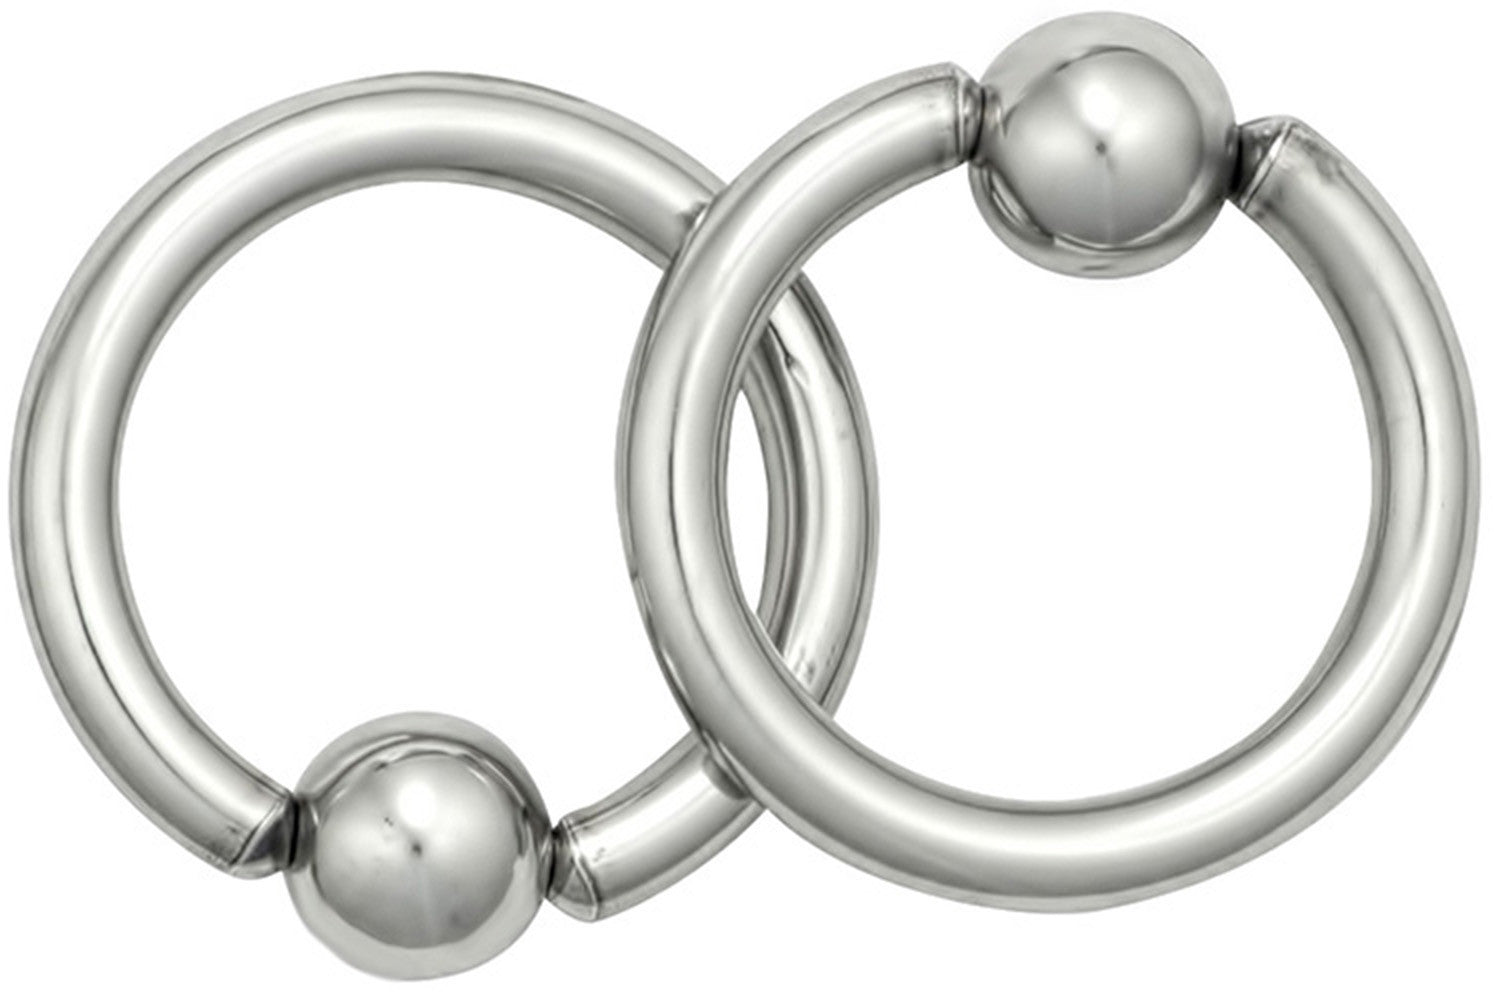 This jewelry is made with surgical grade 316L Stainless Steel. It is hypoallergenic and nickel free.